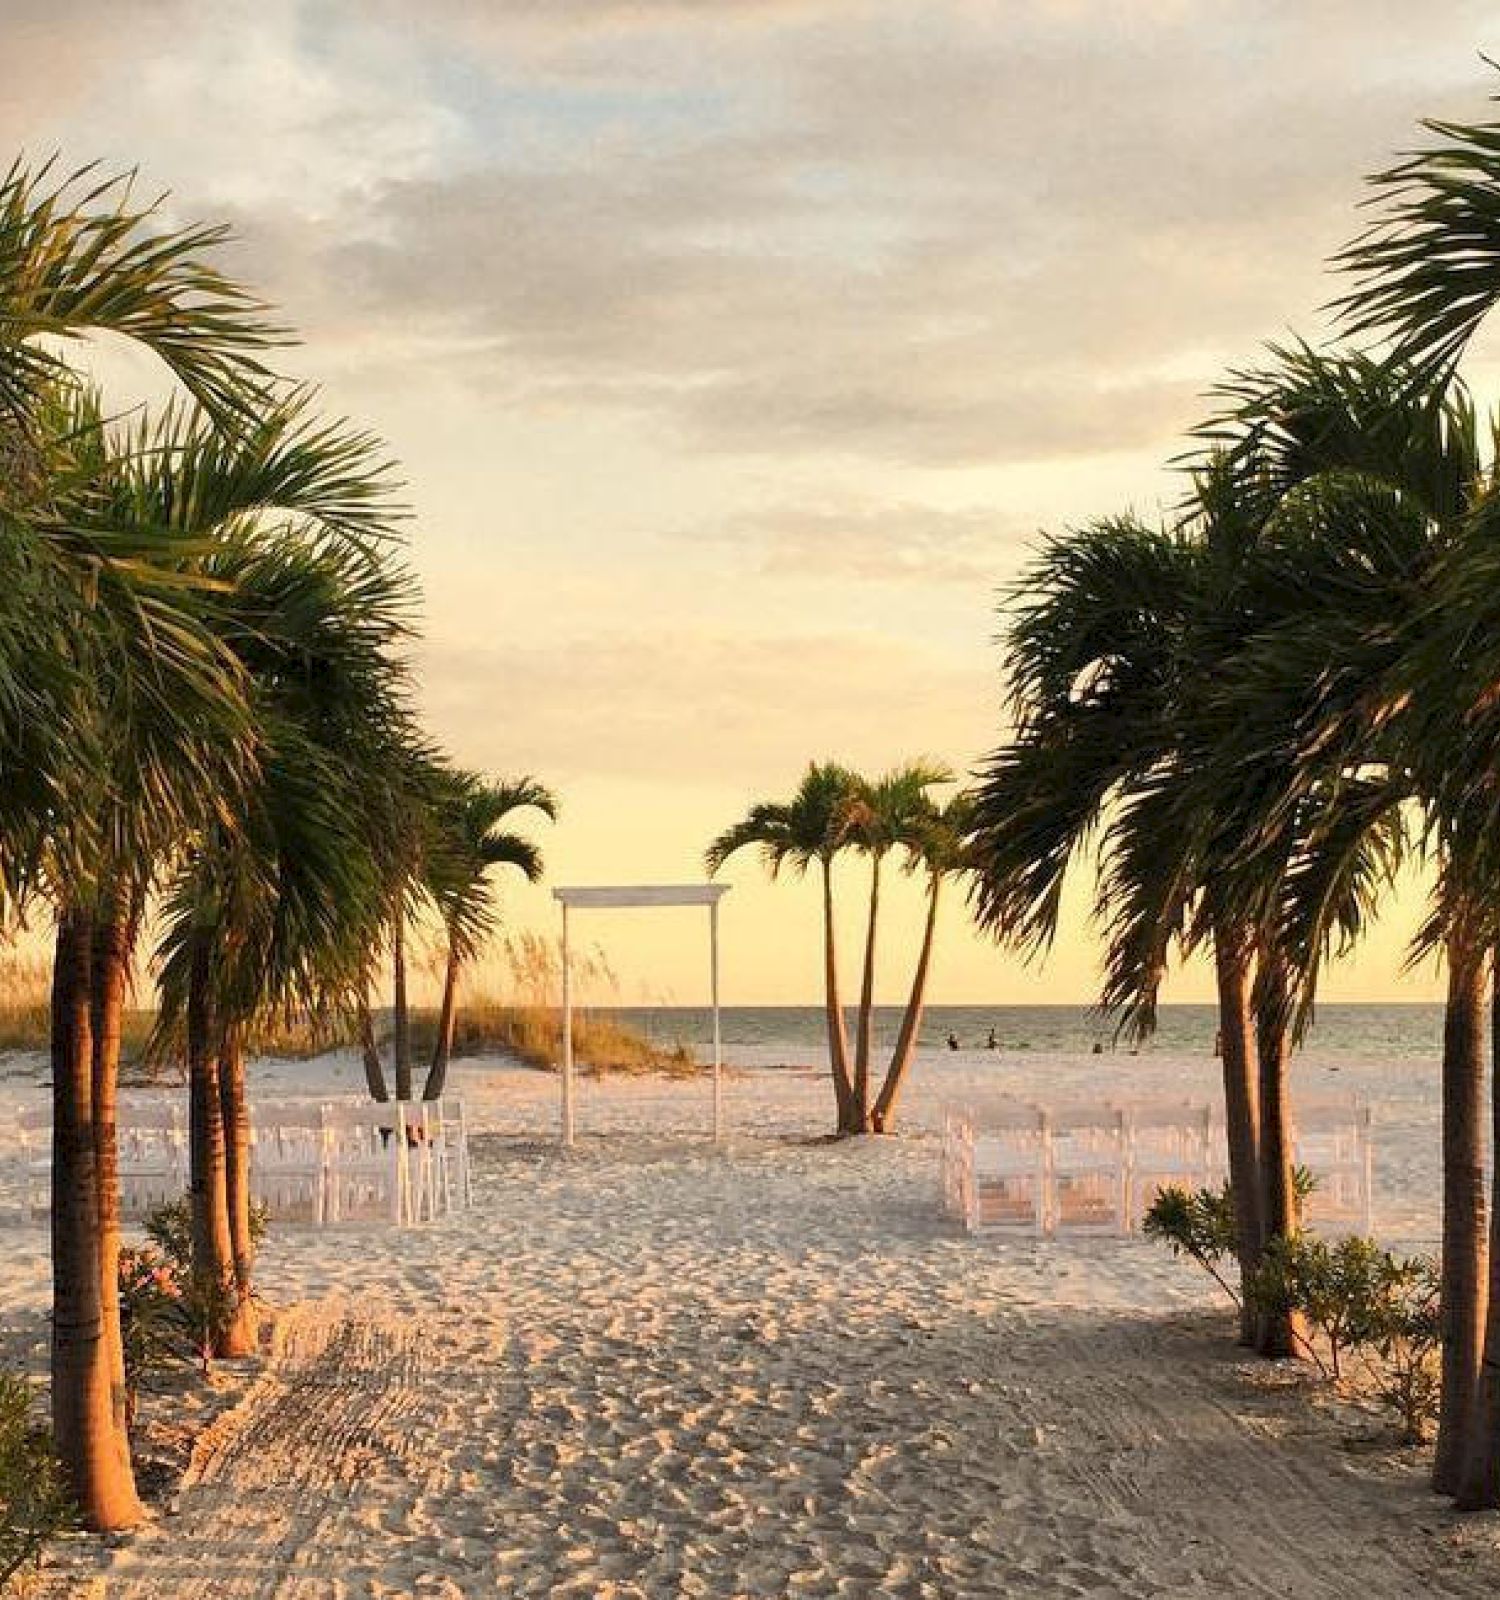 Palm trees line a sandy beach path leading to a sunset view.